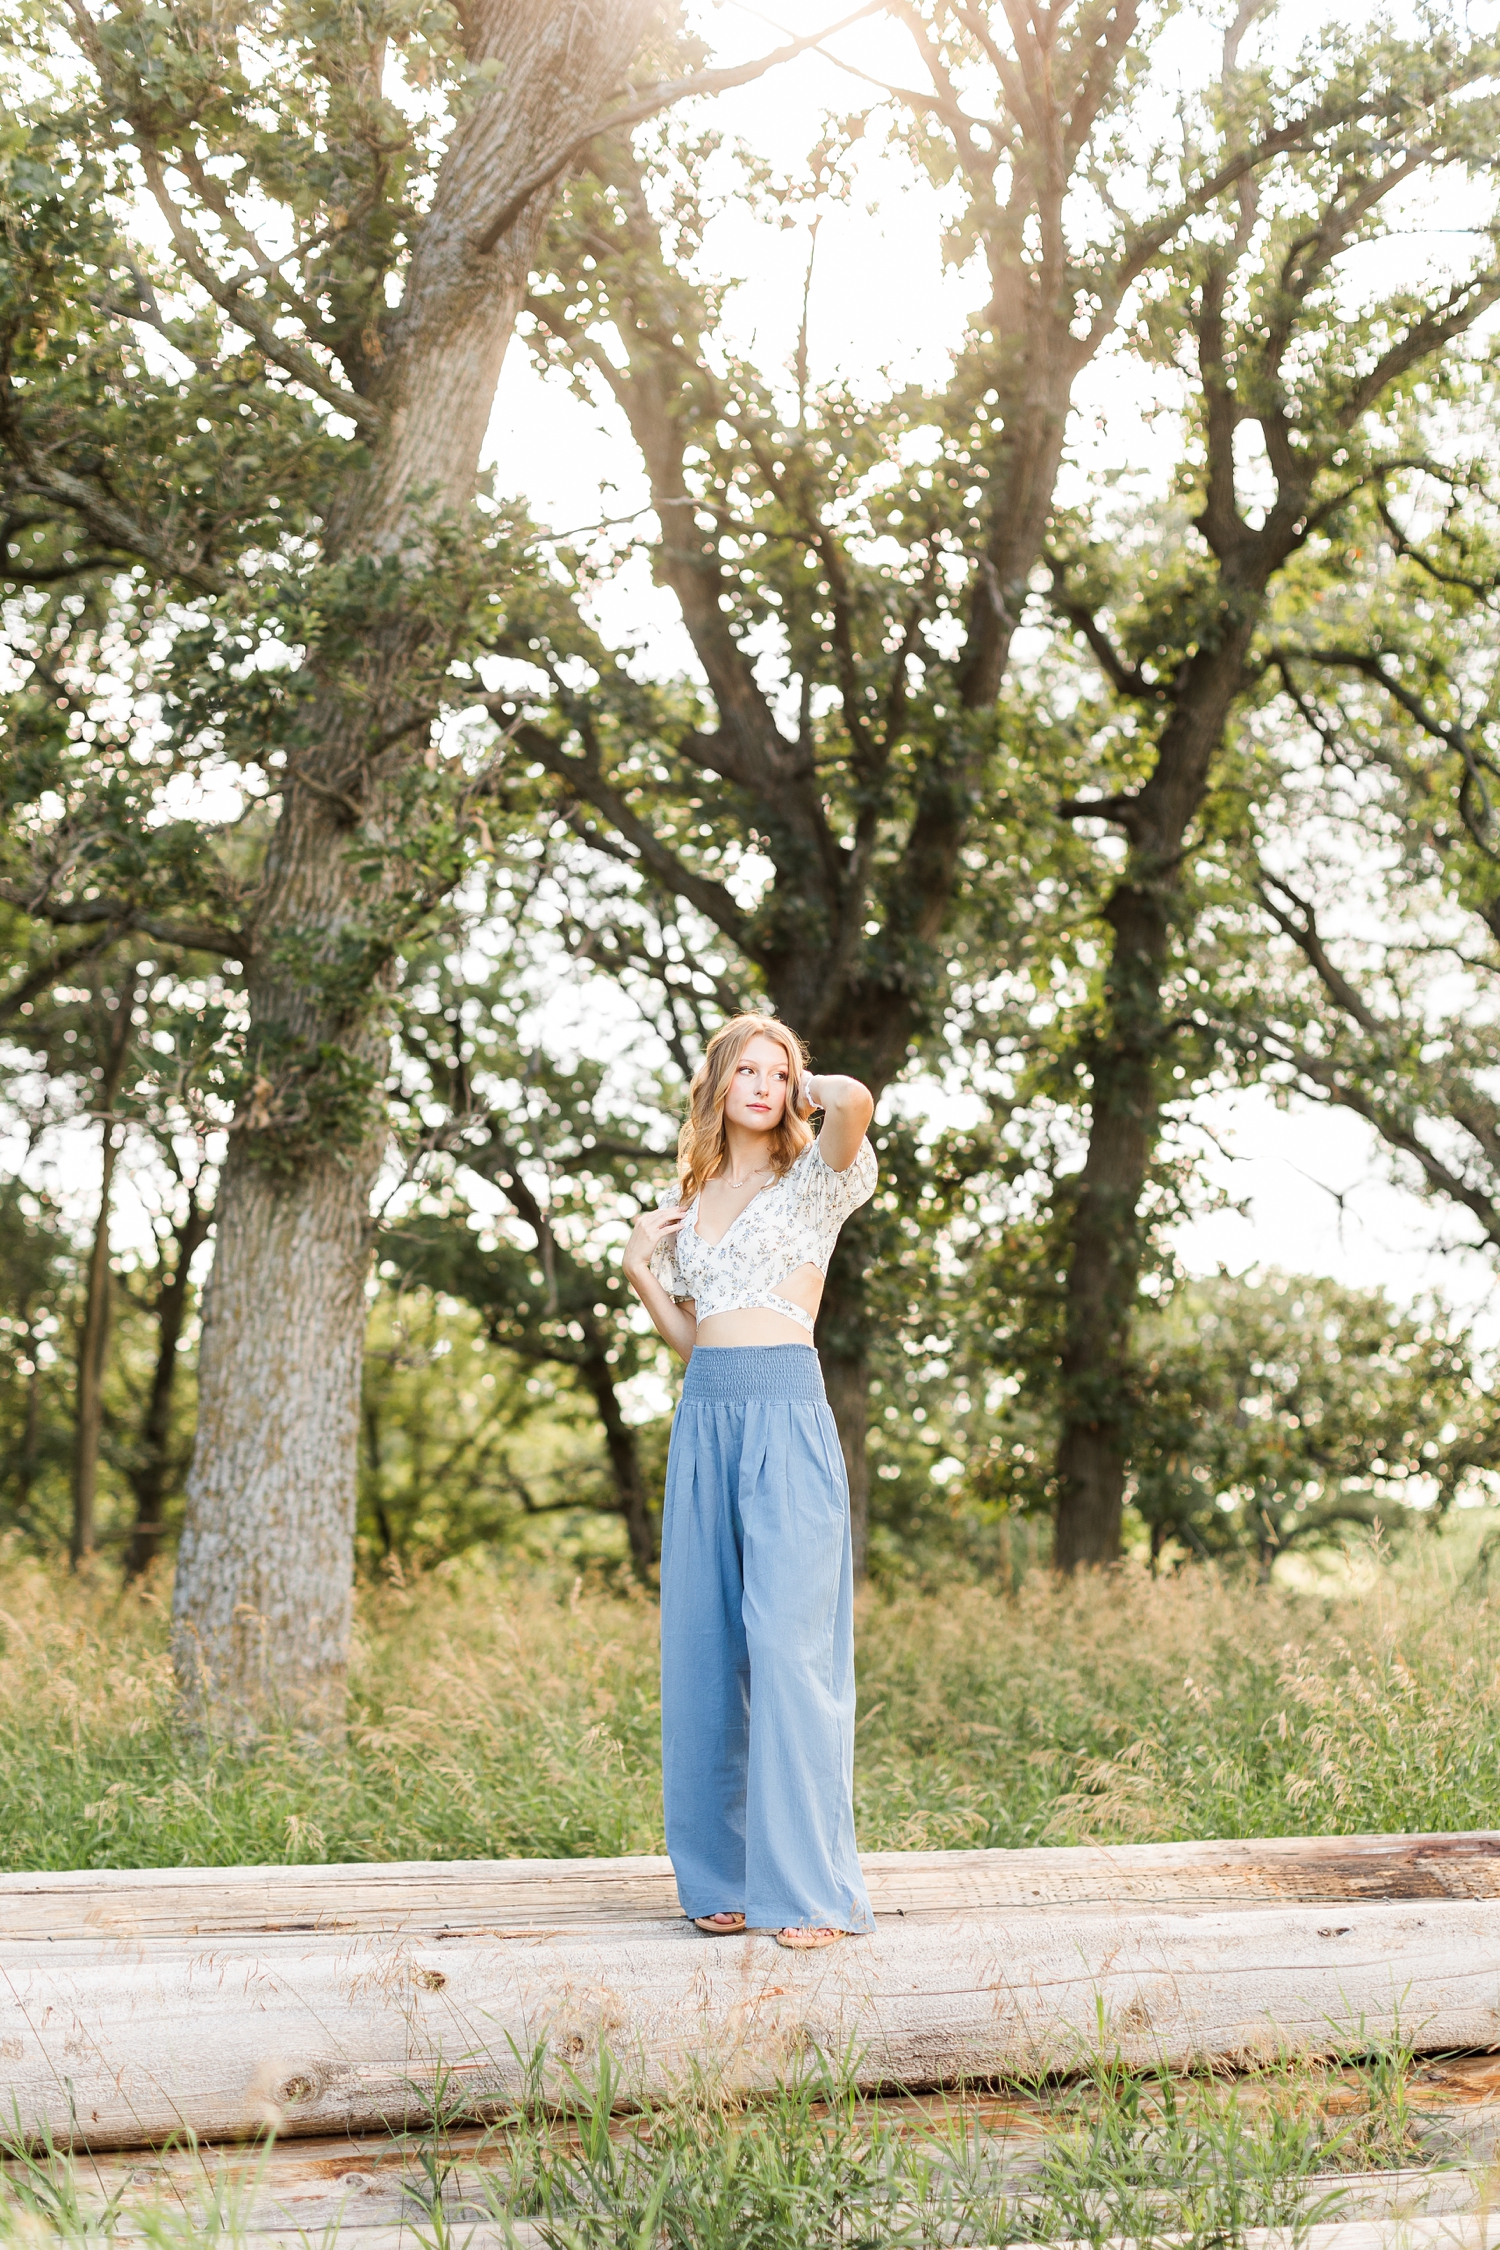 Ryley stands on a stack of cedar posts in a grassy pasture and looks off in the distance | CB Studio